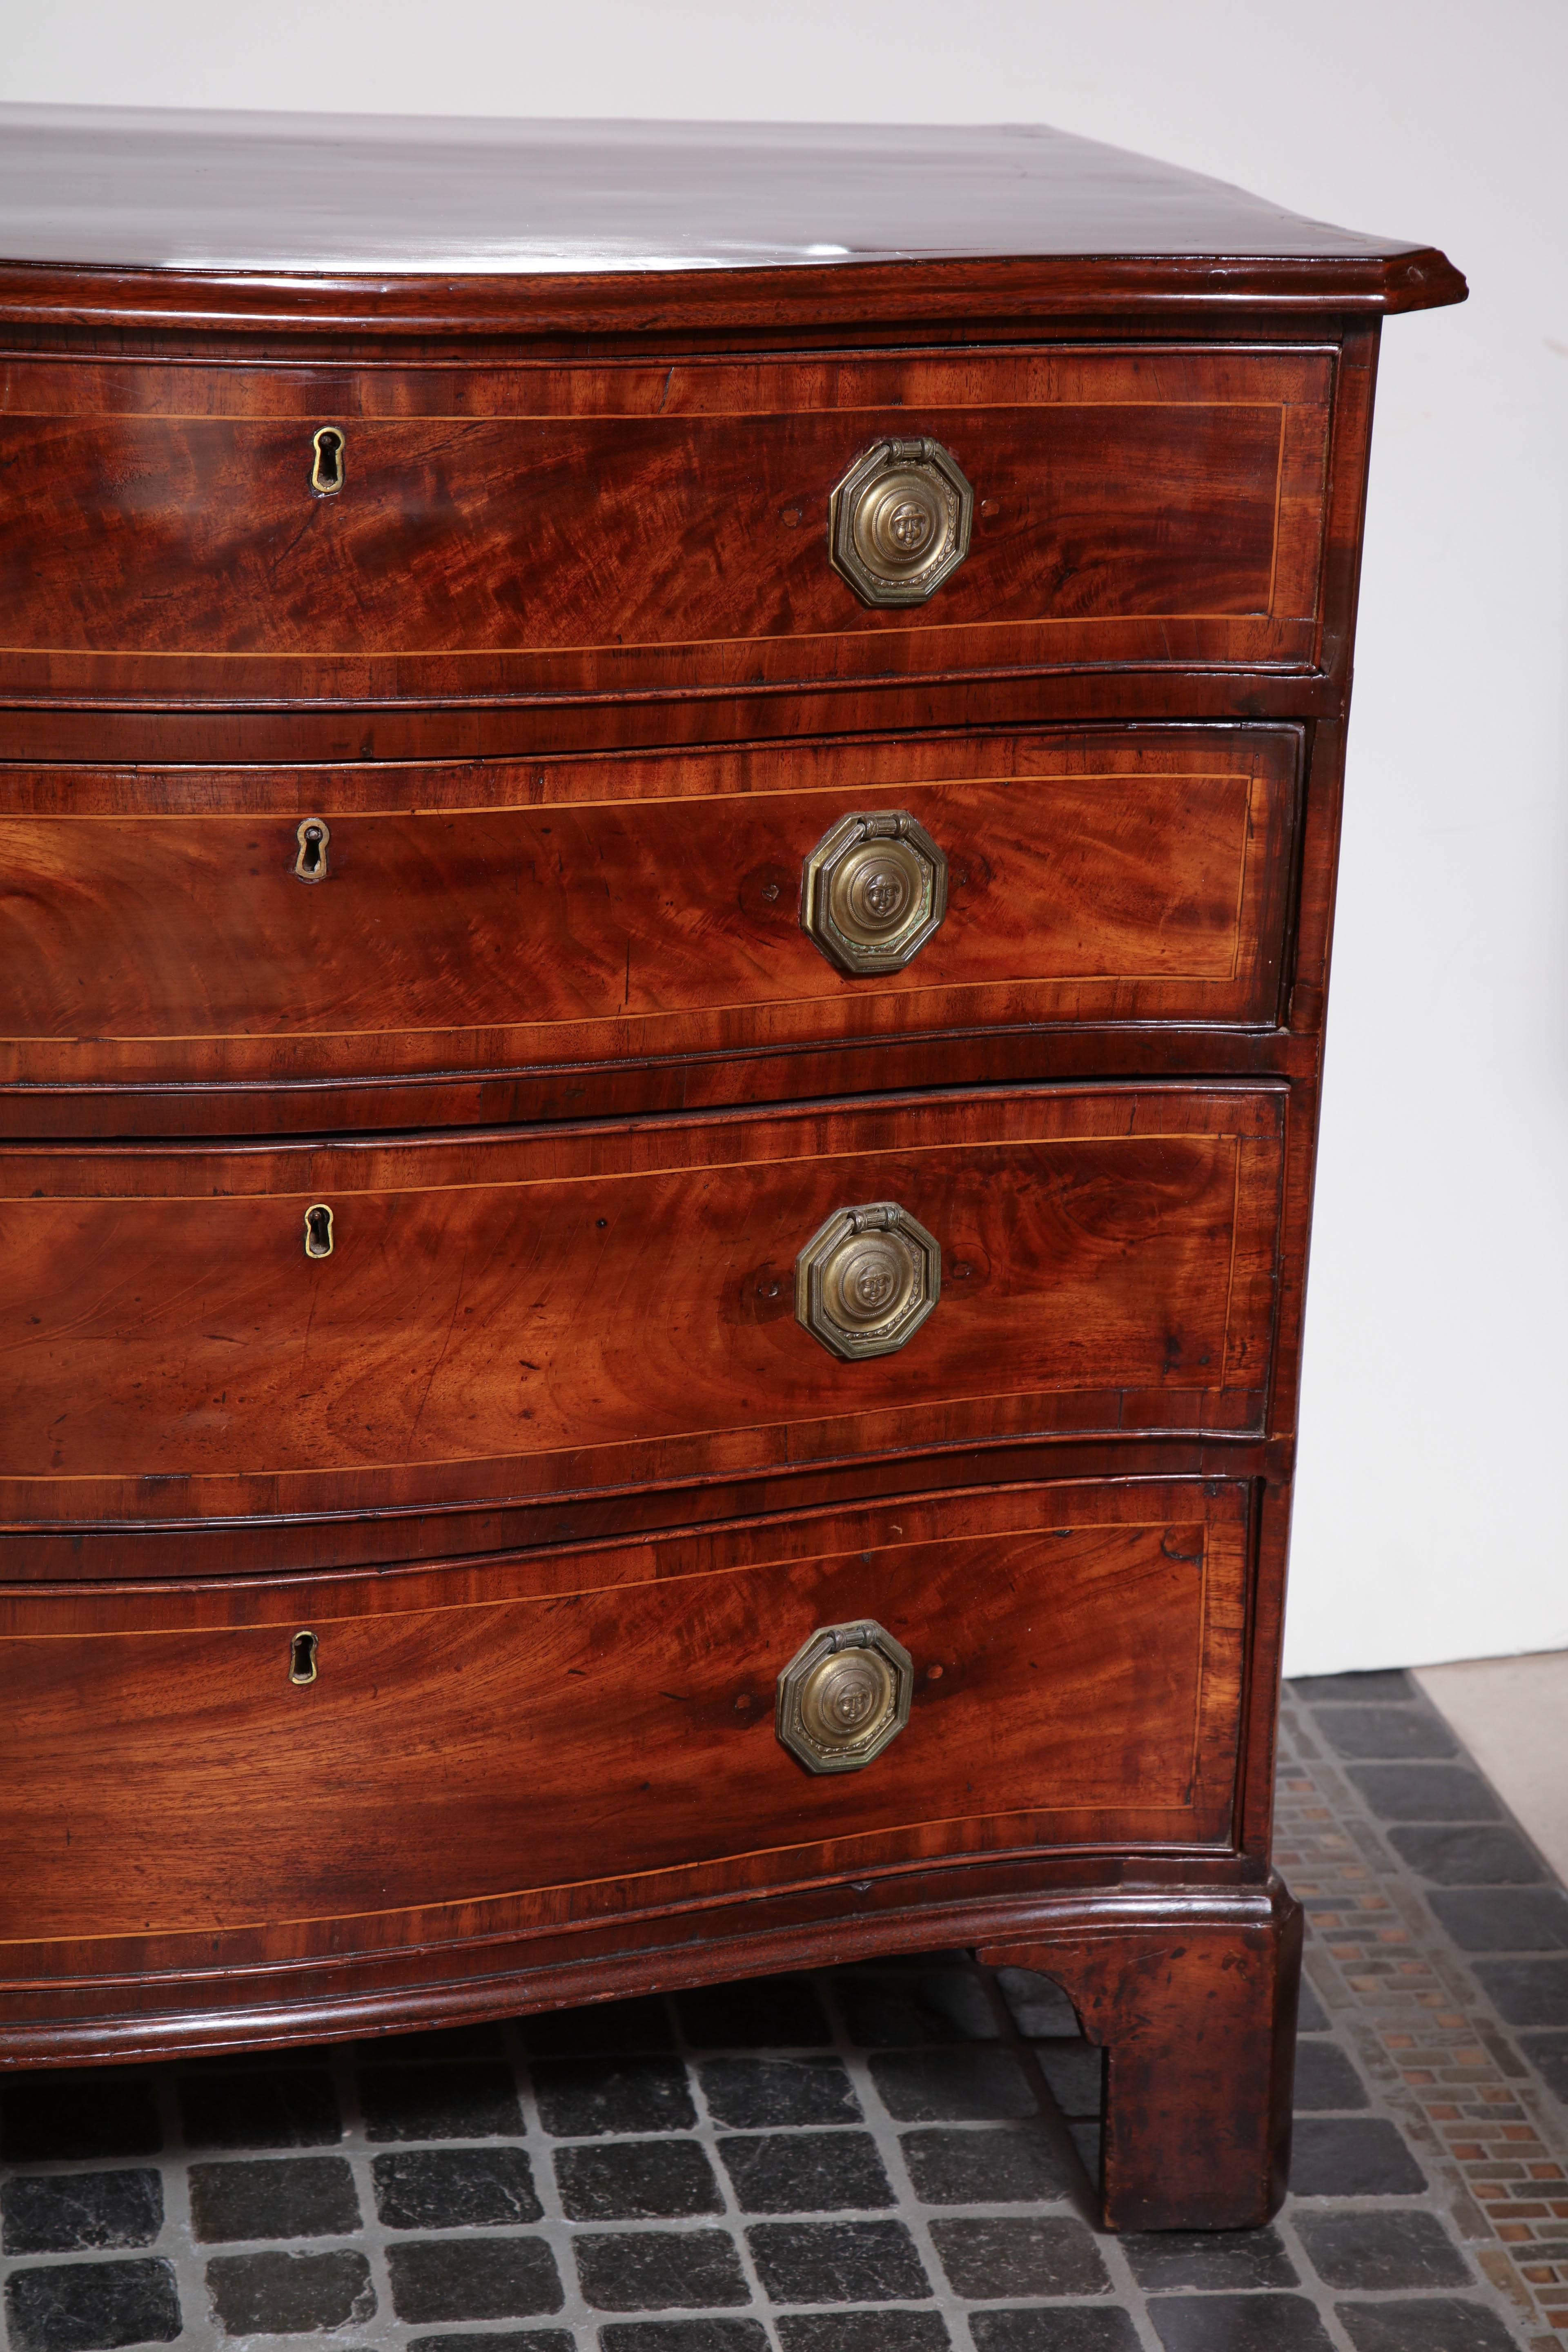 A fine English George III mahogany crossbanded serpentine chest of drawers with molded edge top, graduated drawers and bracket feet.